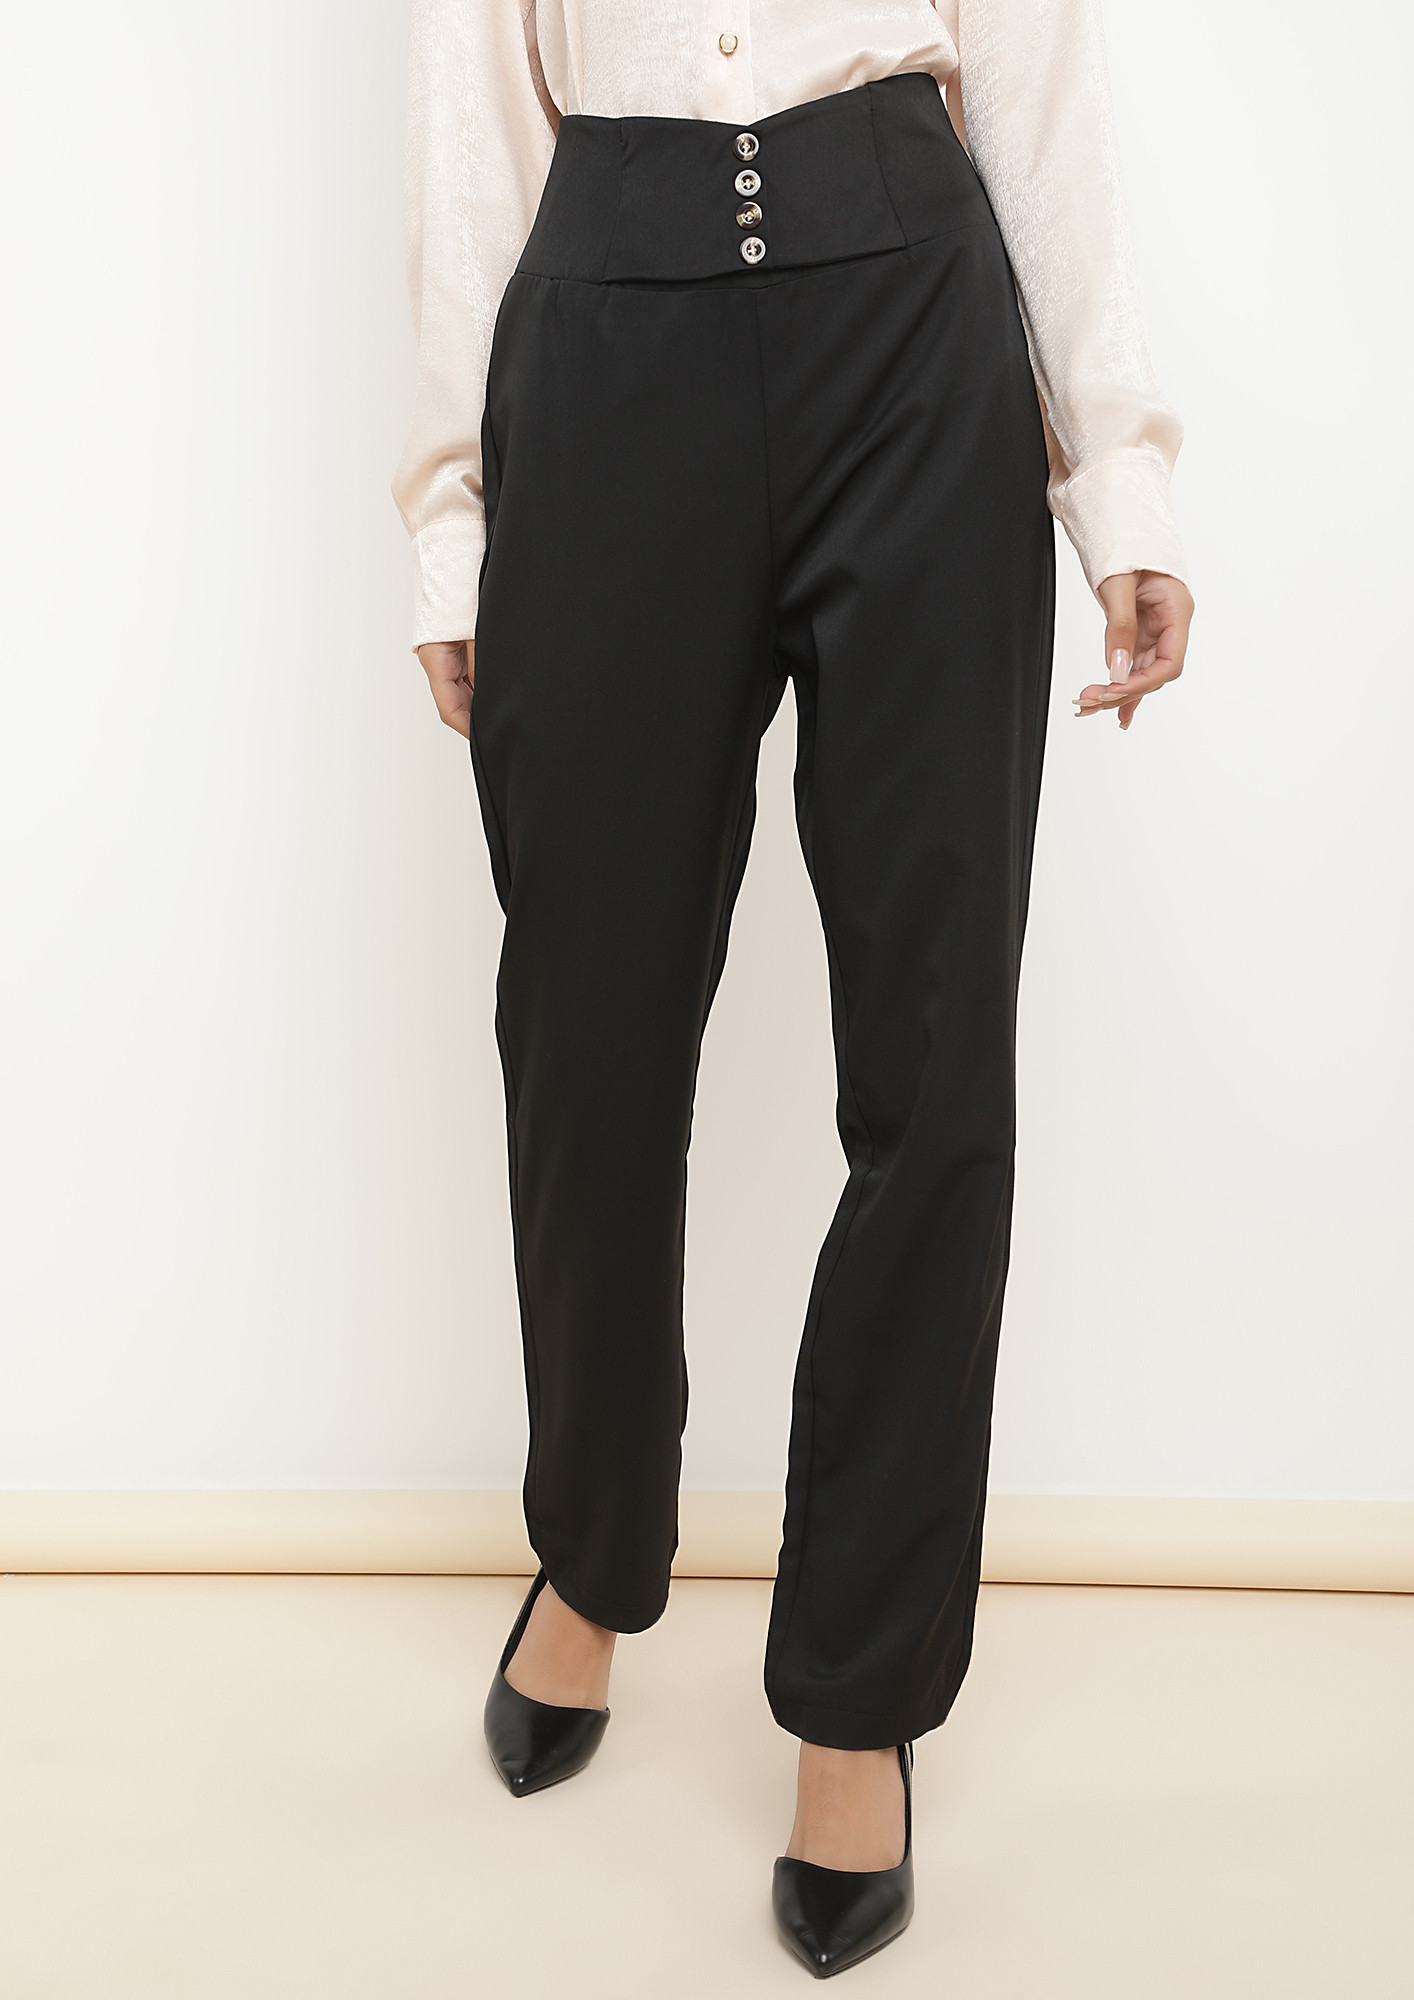 BUSY HOUR WOES BLACK PEG LEG TROUSERS